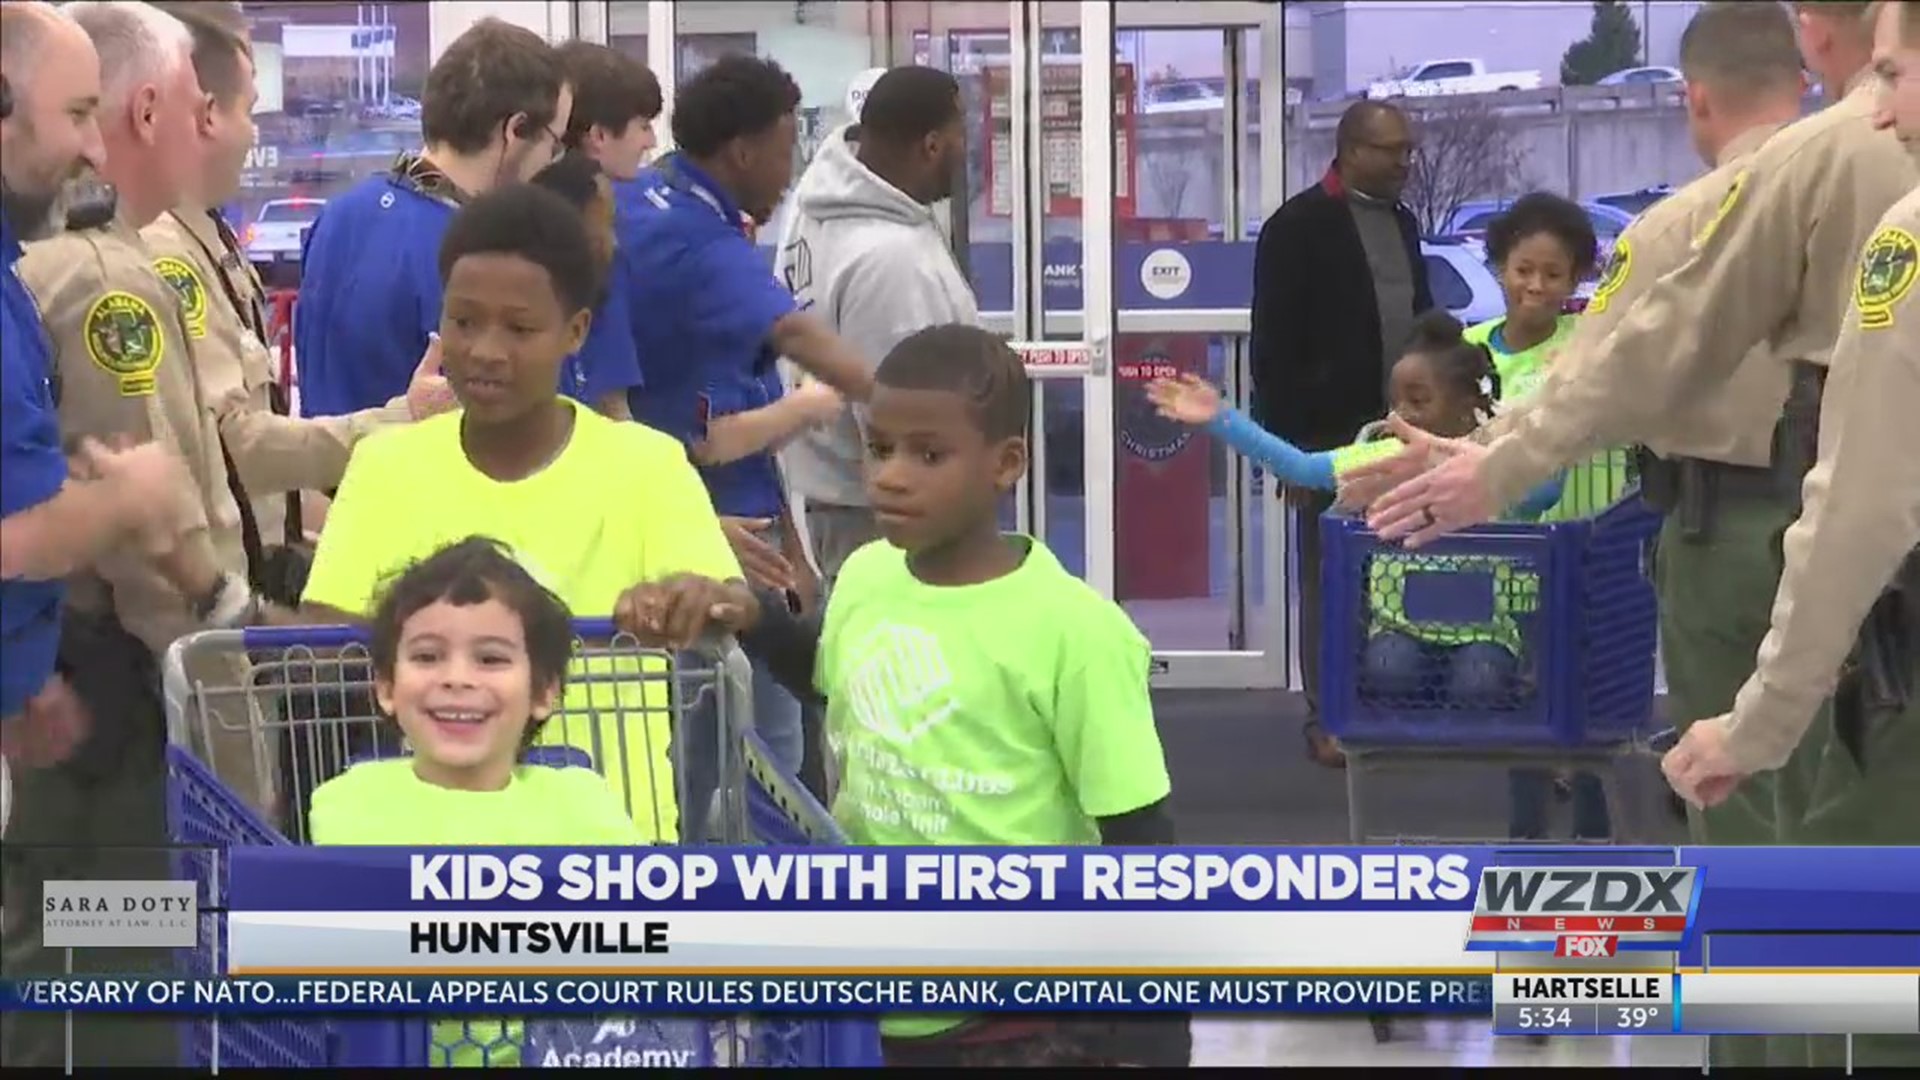 This week 150 children across the Valley will get a Christmas shopping excursion they won't forget.